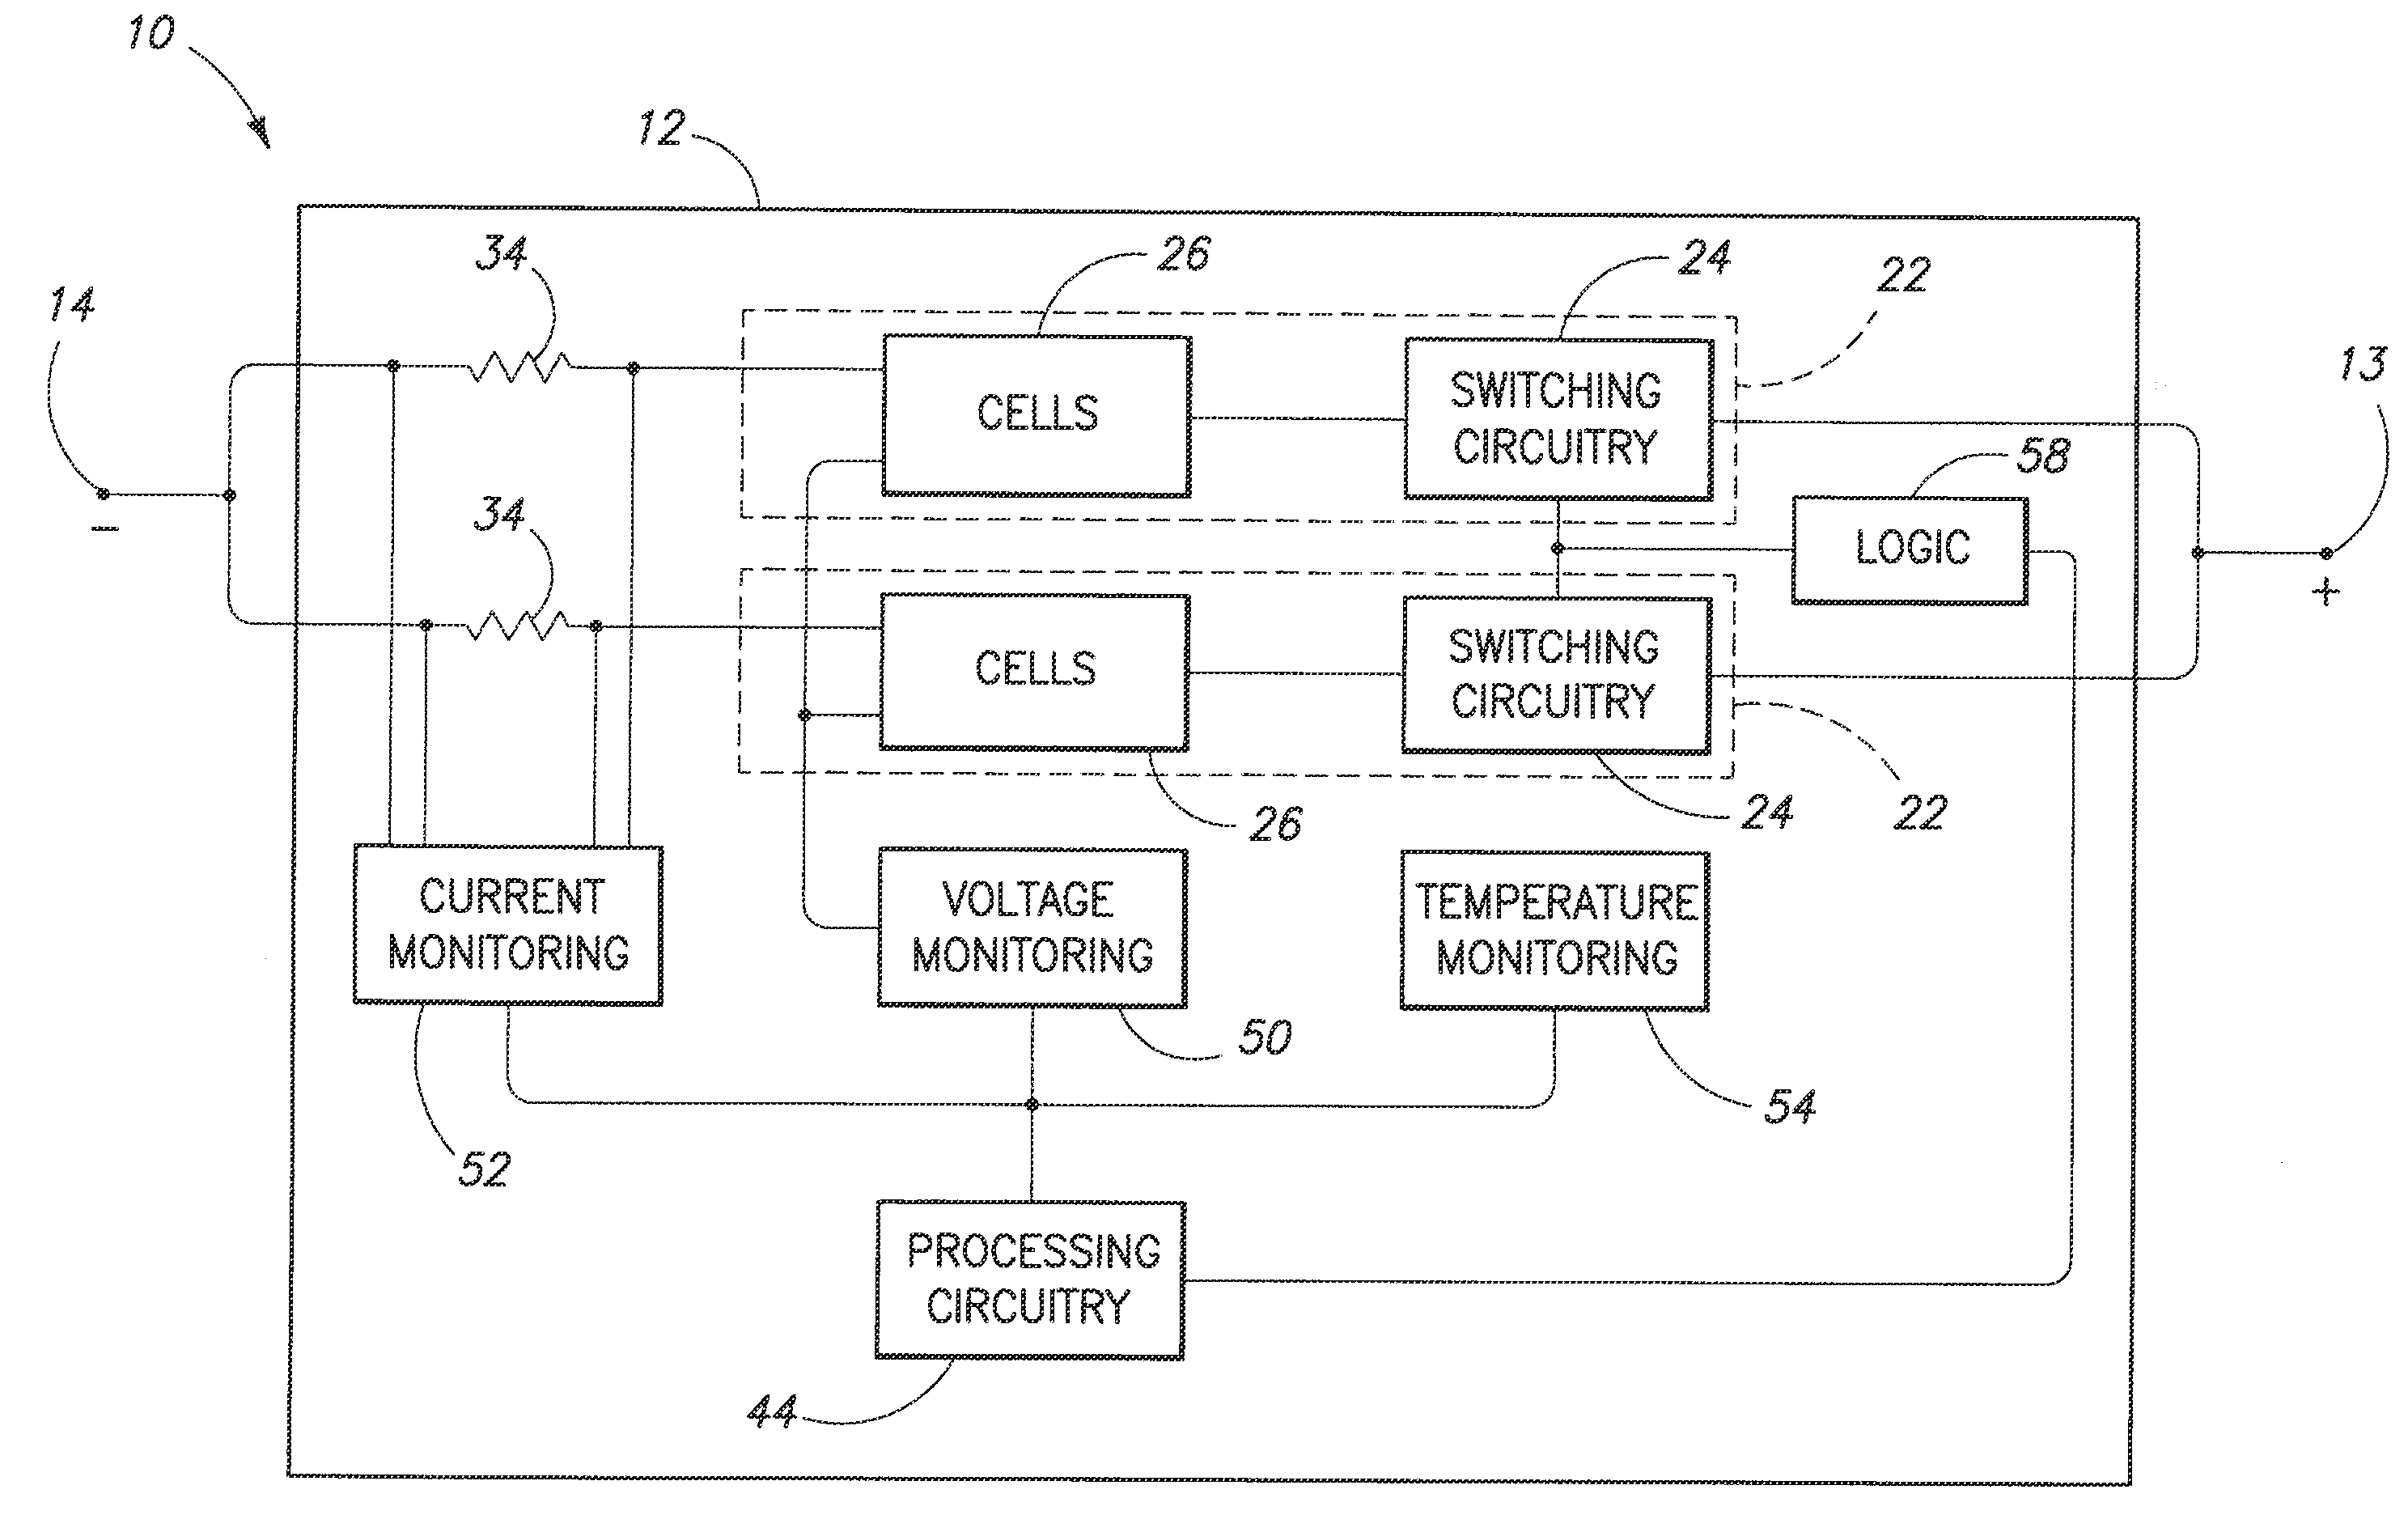 Batteries, Battery Systems, Battery Submodules, Battery Operational Methods, Battery System Operational Methods, Battery Charging Methods, and Battery System Charging Methods